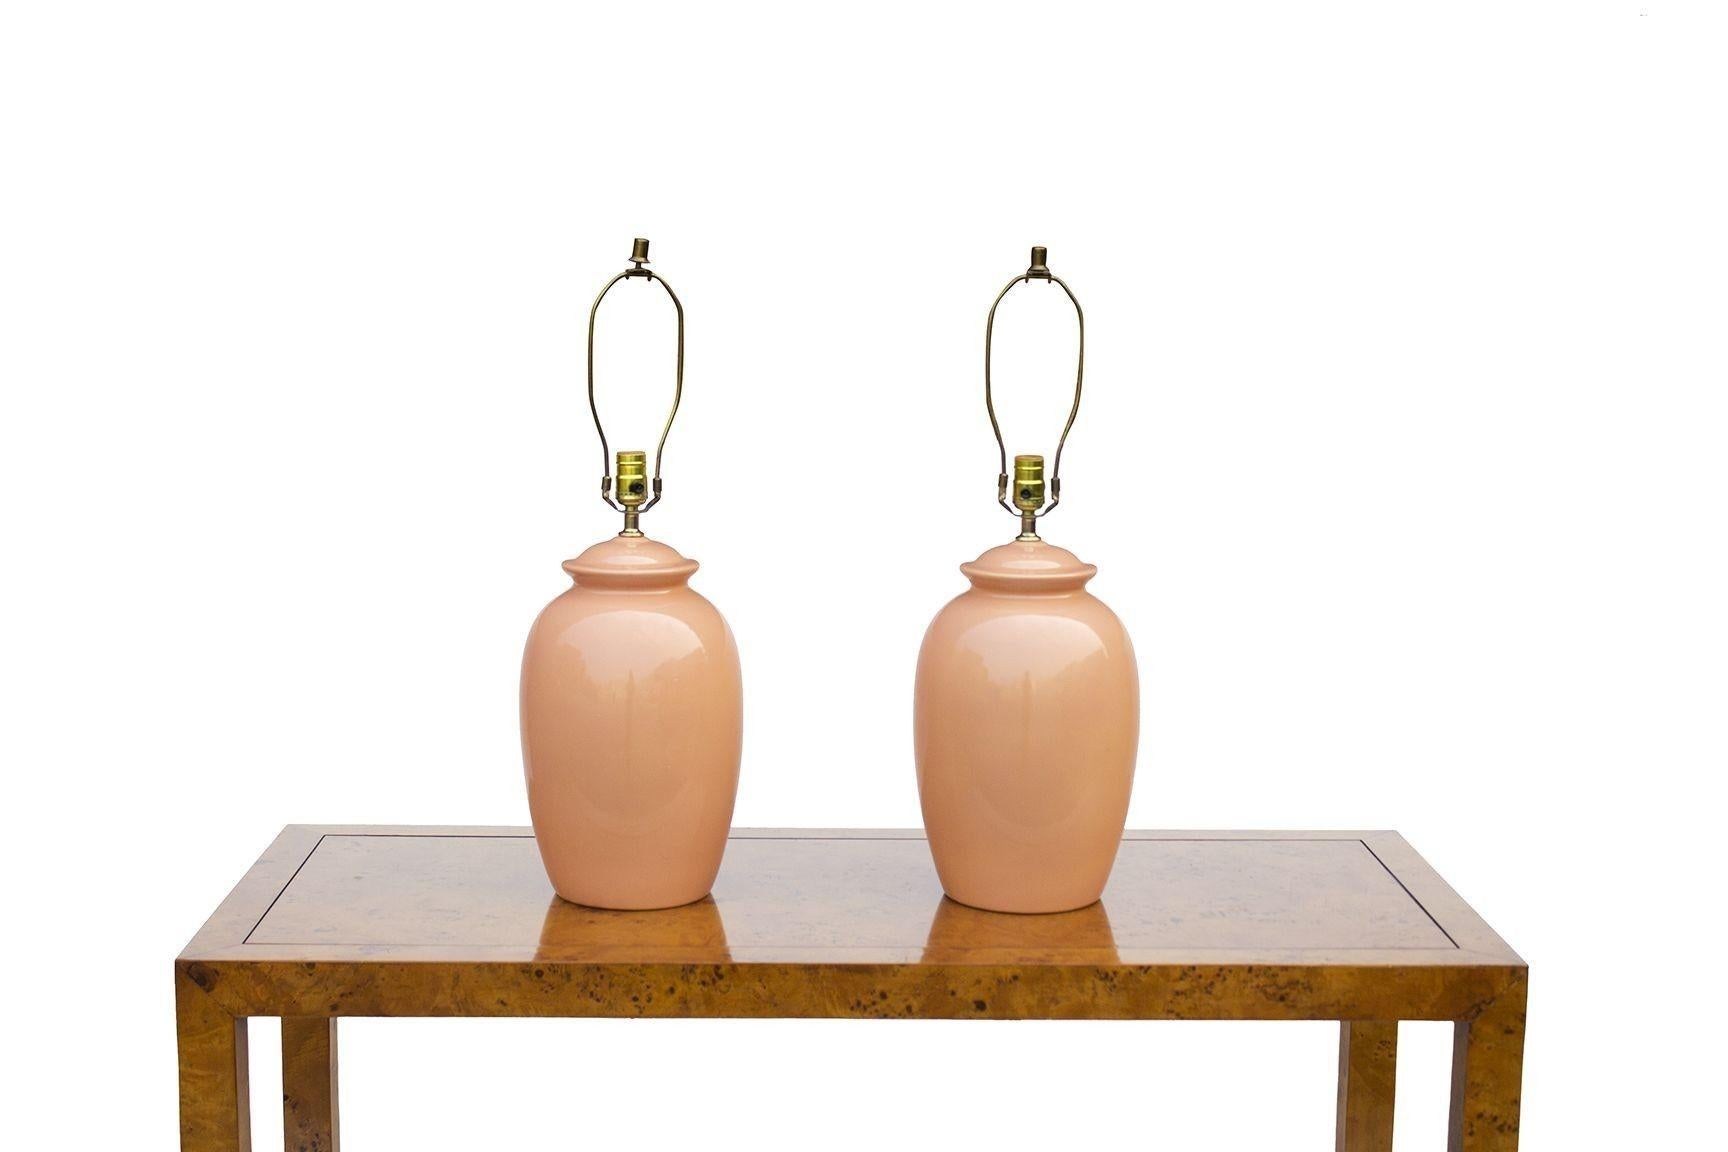 USA, 1980s
Peach Ginger Jar Ceramic Table Lamps. Nice '80s pop of color in a classic profile.
CONDITION NOTES: No chips; original wiring is in working condition.
DIMENSIONS: 9